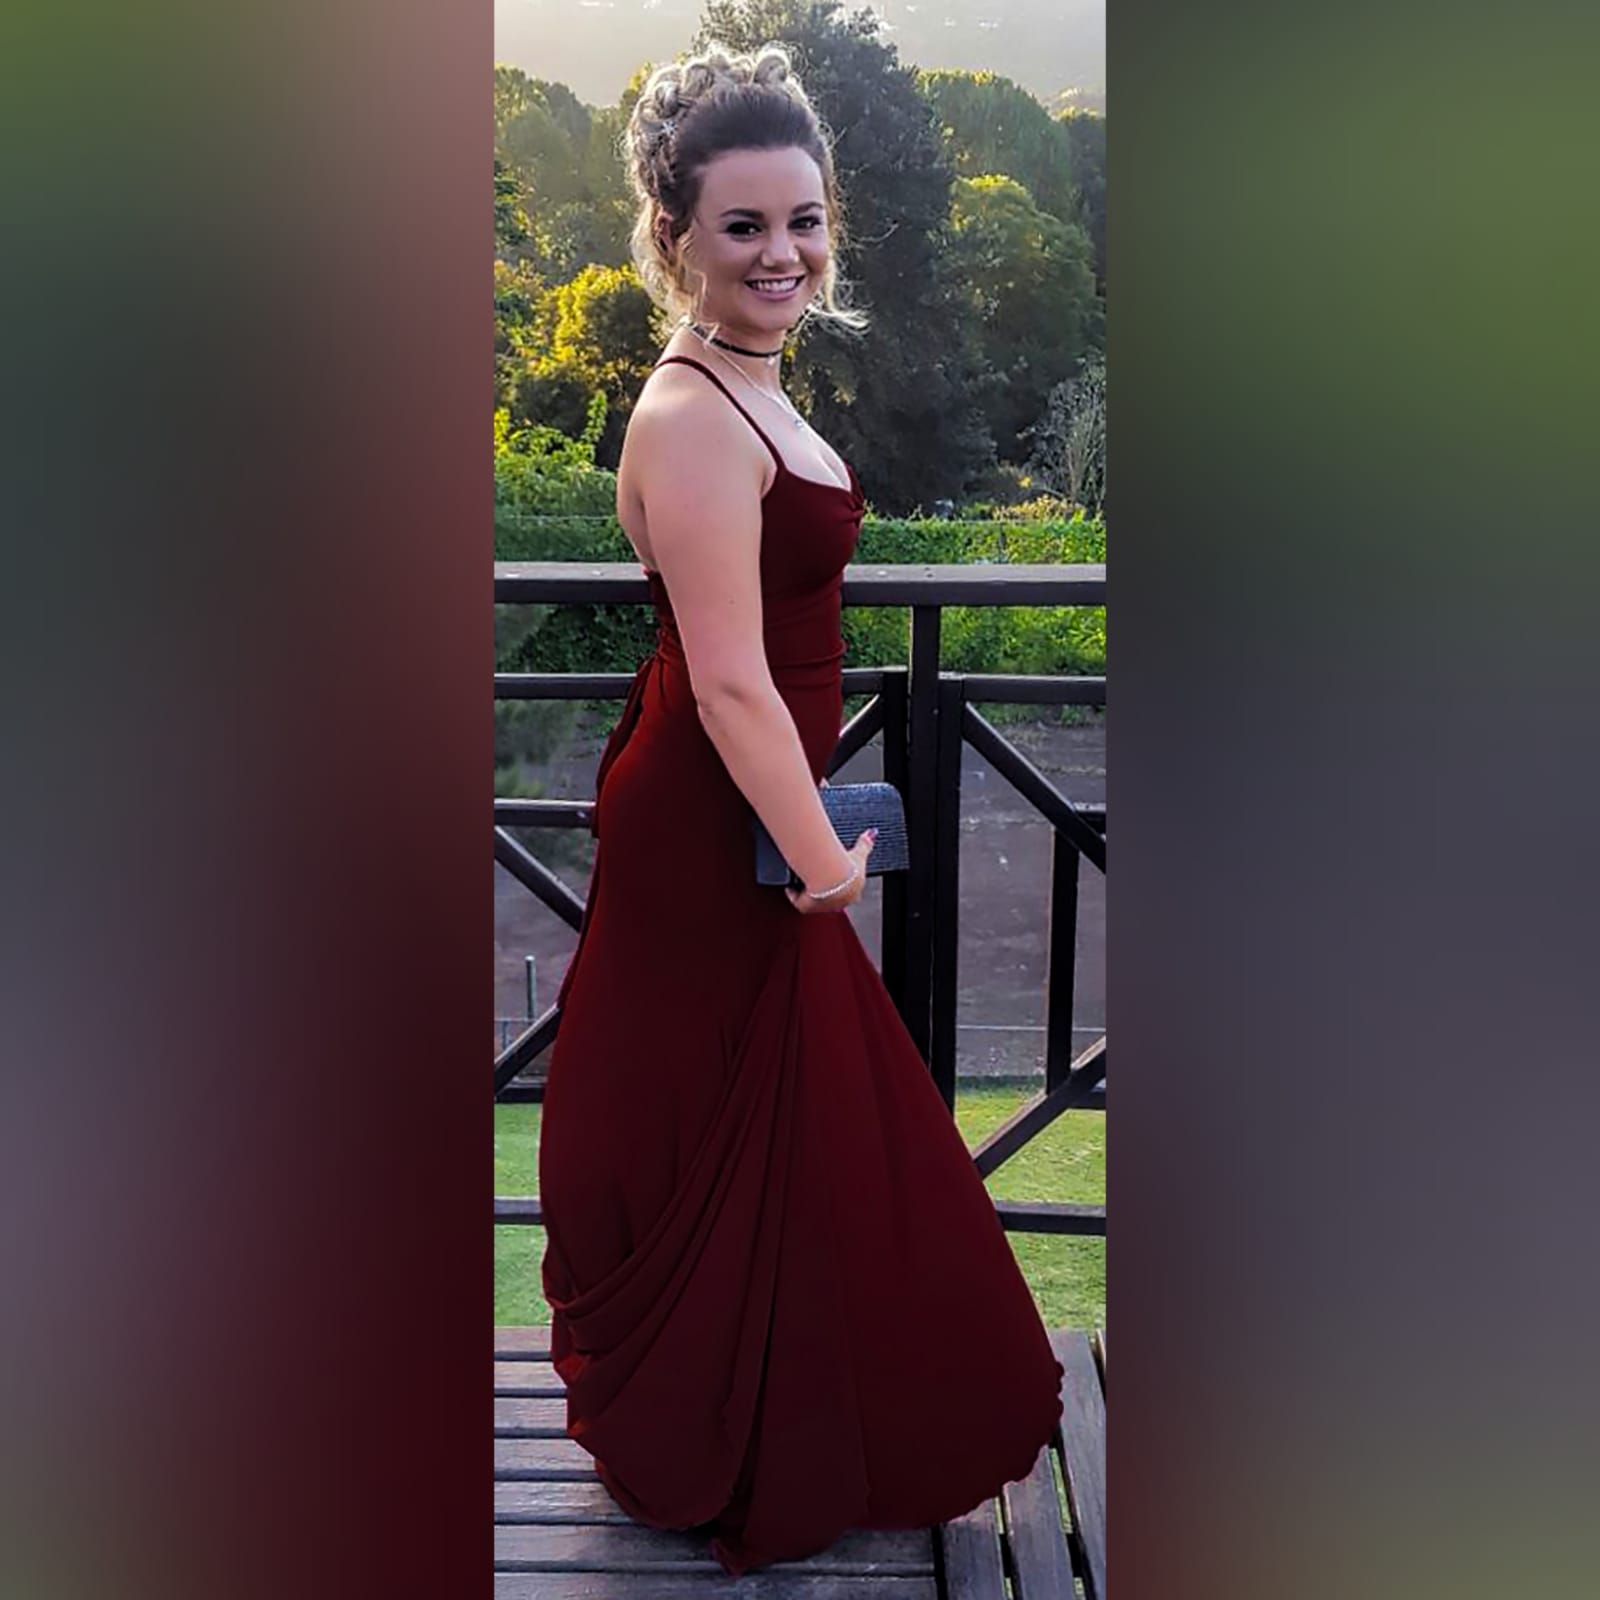 Maroon lace-up back long simple matric dance dress 7 maroon lace-up back long simple matric dance dress with thin shoulder straps, high slit and a small train. Lace-up back to adjust the fit.